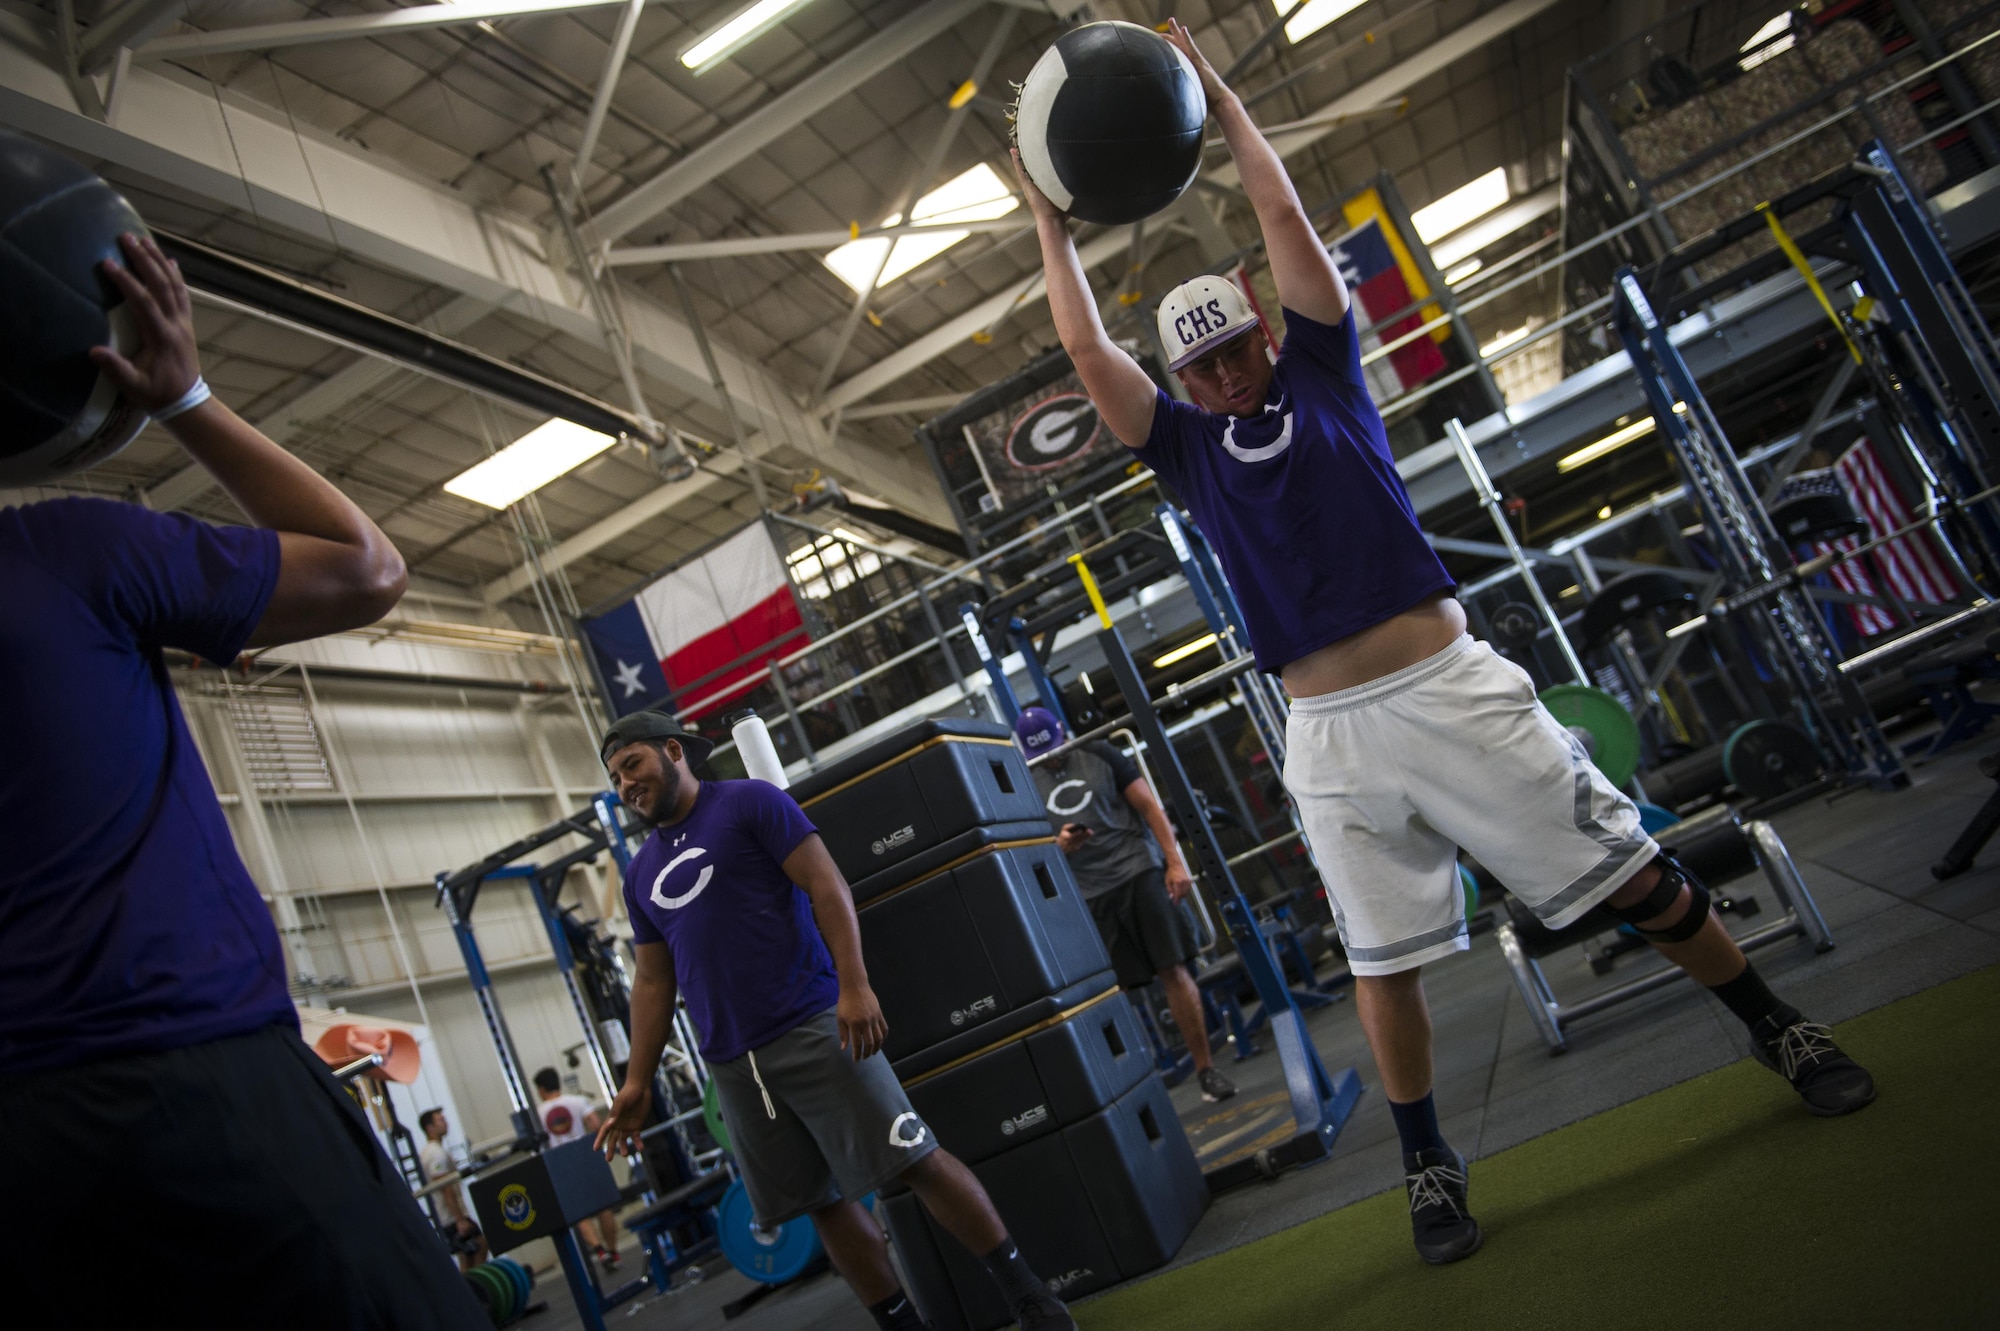 Clovis High School football players exercise at the 26th Special Tactics Squadron’s gymnasium during their tour at Cannon Air Force Base, NM, July 19, 2017. Students followed a regimen constructed and used by 26th STS Airmen in what one of them describes as a “world class facility.” (U.S. Air Force photo by Senior Airman Lane T. Plummer)